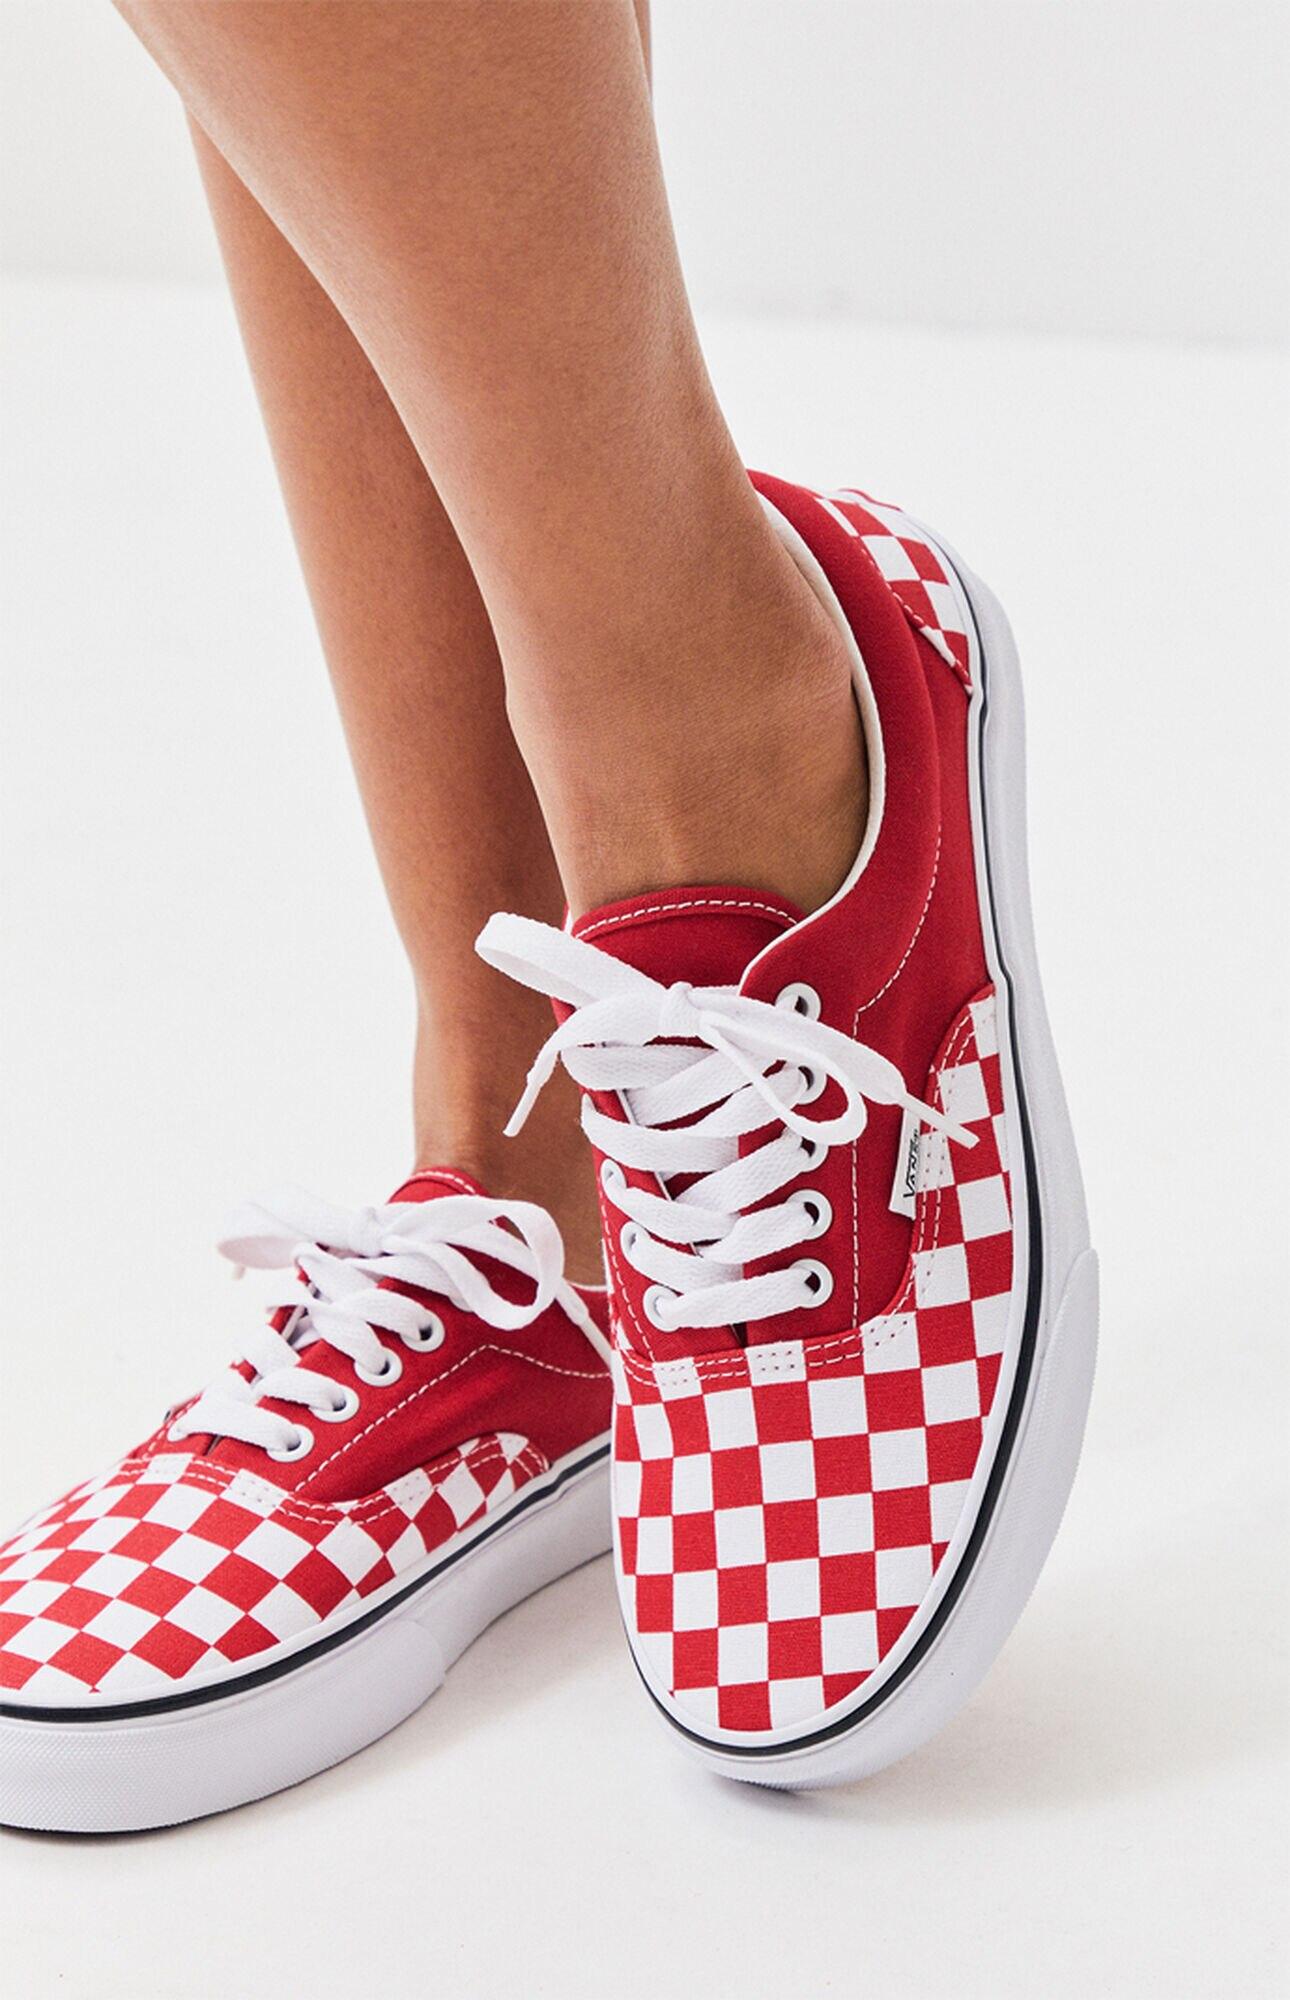 vans authentic red checkerboard